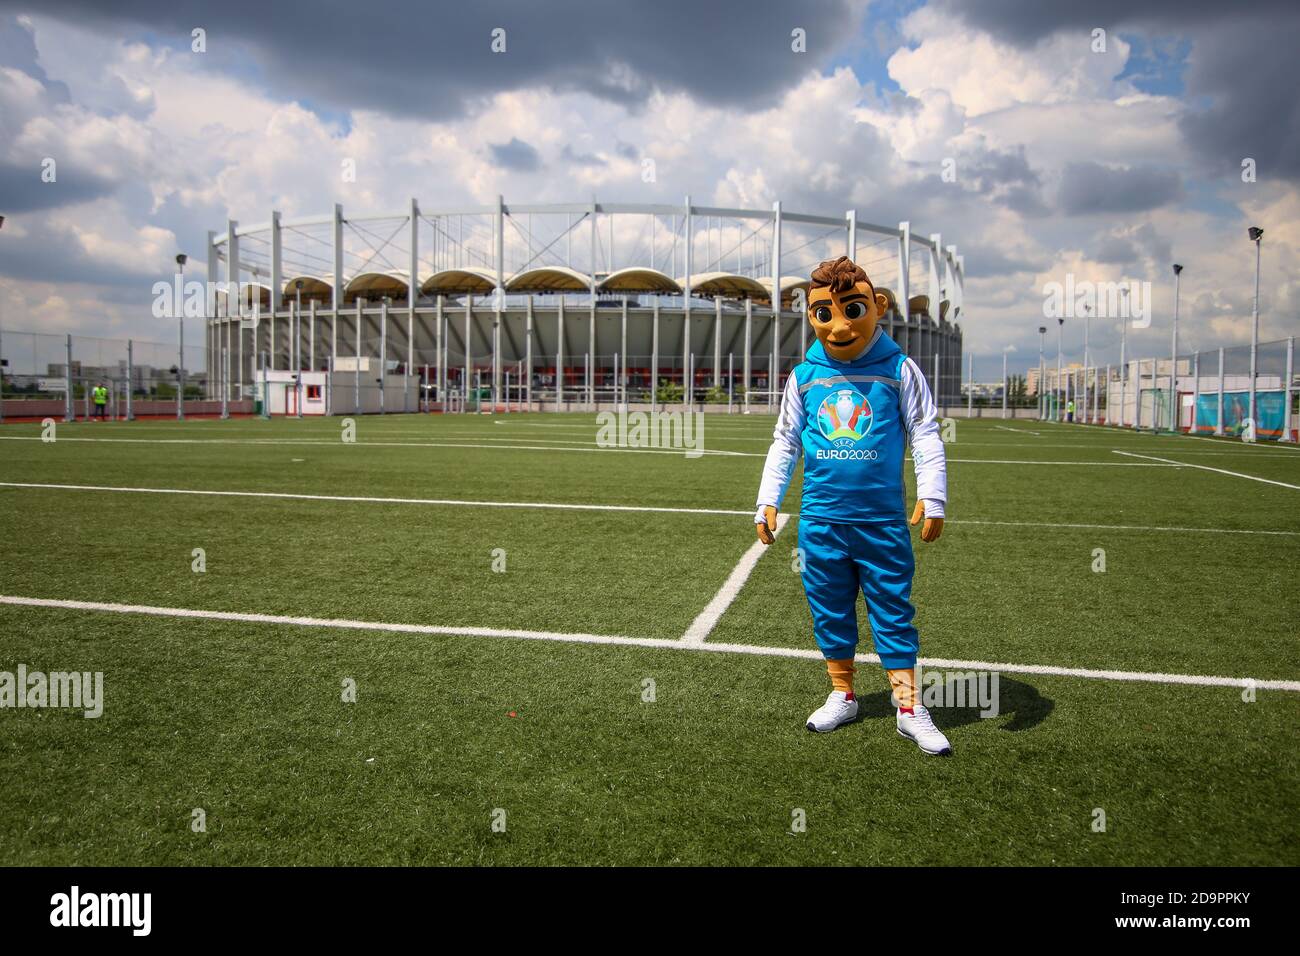 Bucharest, Romania - May 24, 2019: A person dressed as Skillzy, the official Euro 2020 soccer tournament mascot, at the National Arena Stadium. Stock Photo